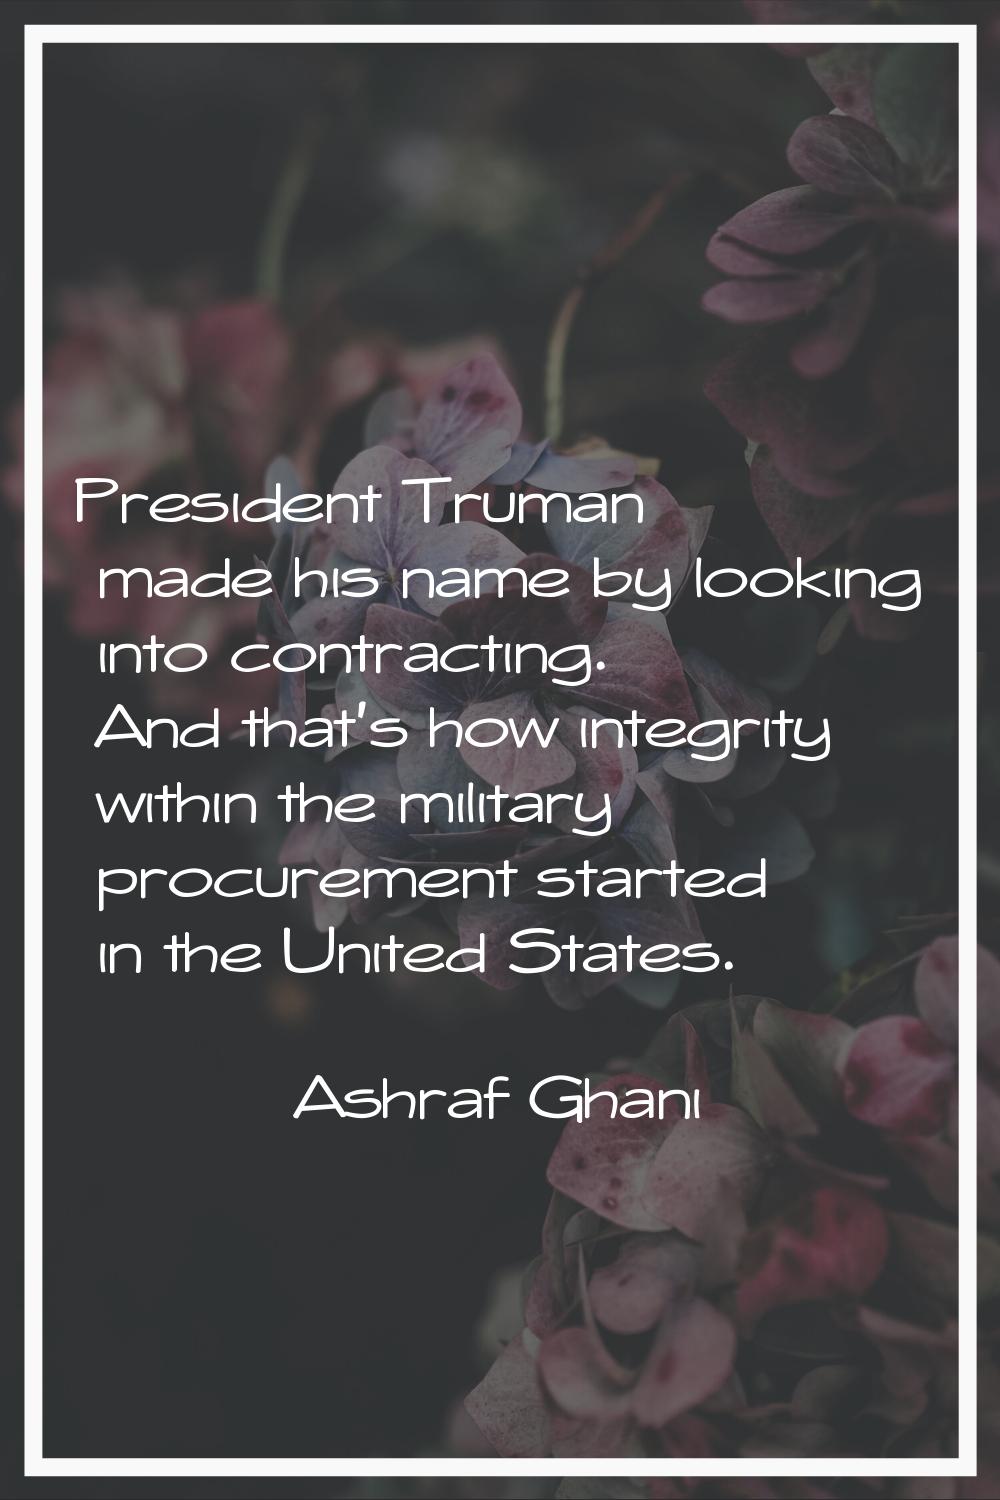 President Truman made his name by looking into contracting. And that's how integrity within the mil